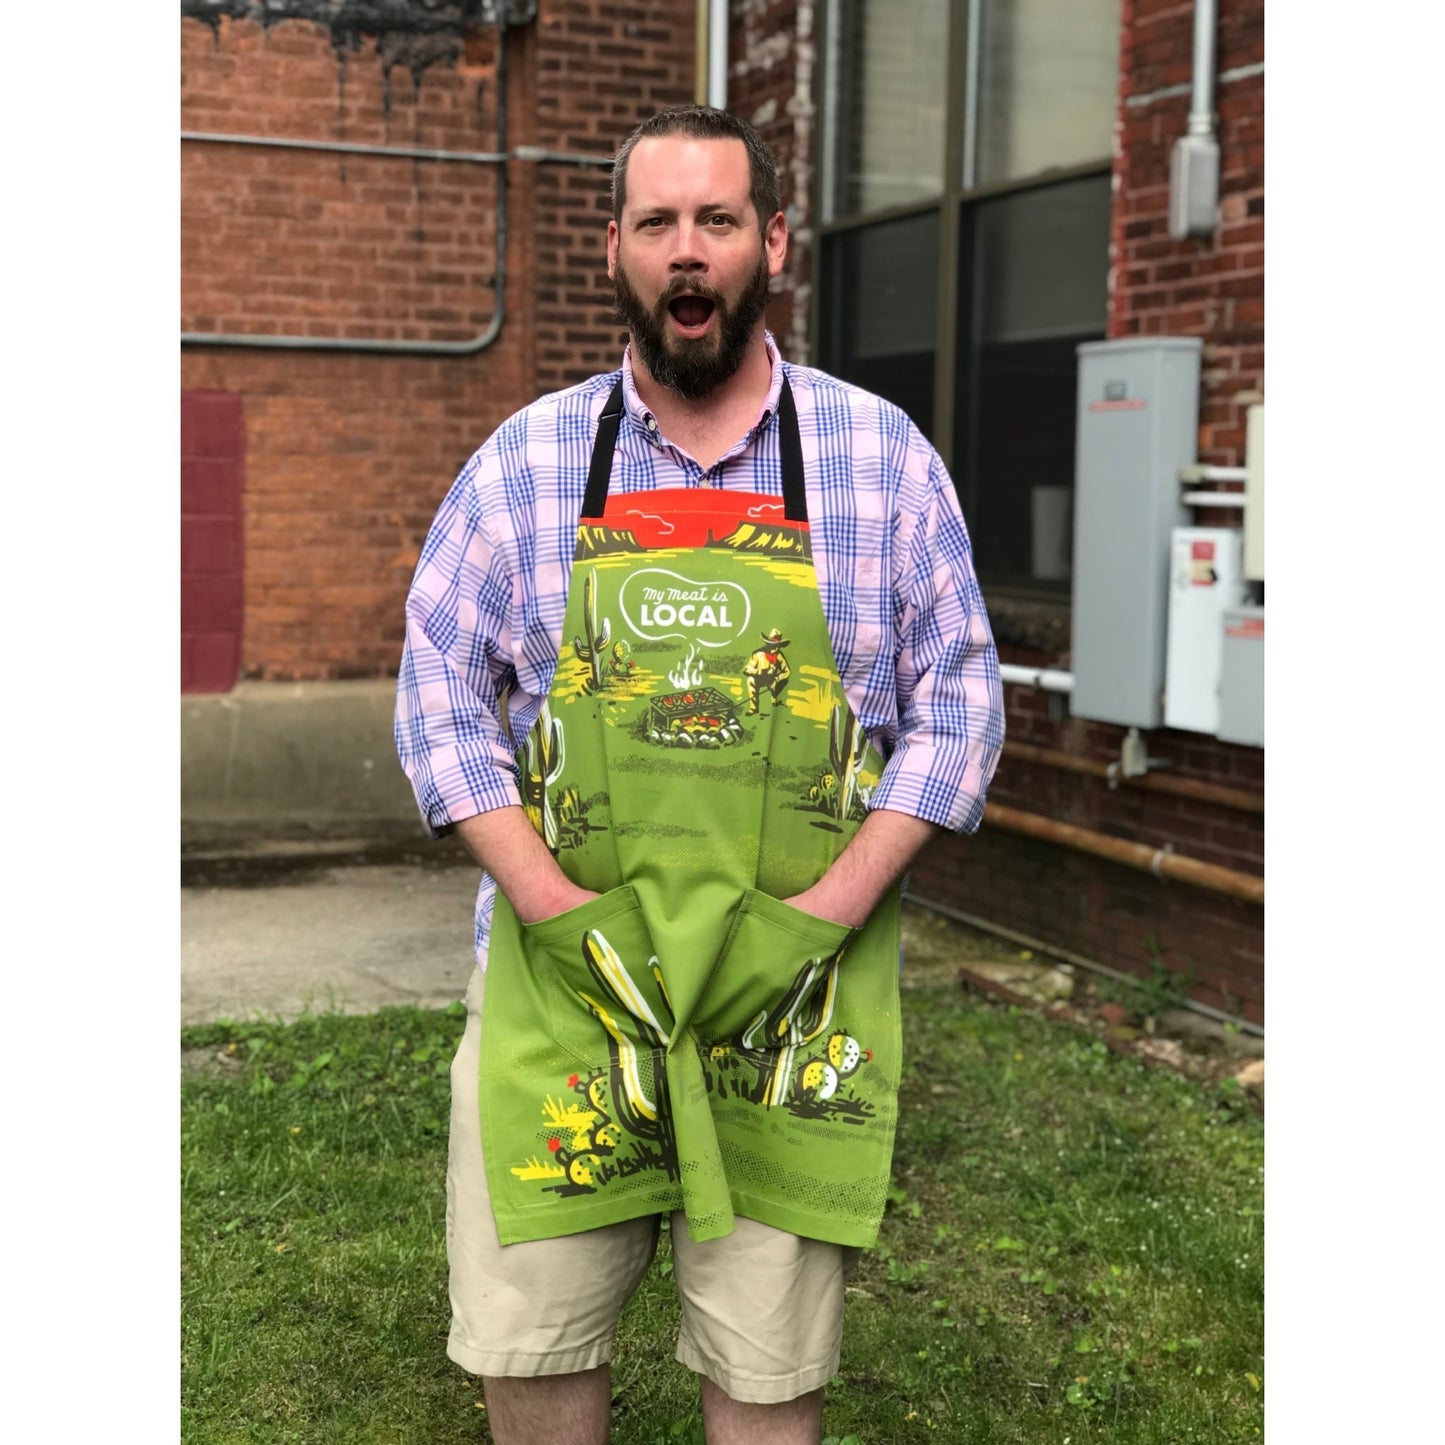 My Meat Is Local Funny Cooking and BBQ Apron Unisex 2 Pockets Adjustable Strap 100% Cotton